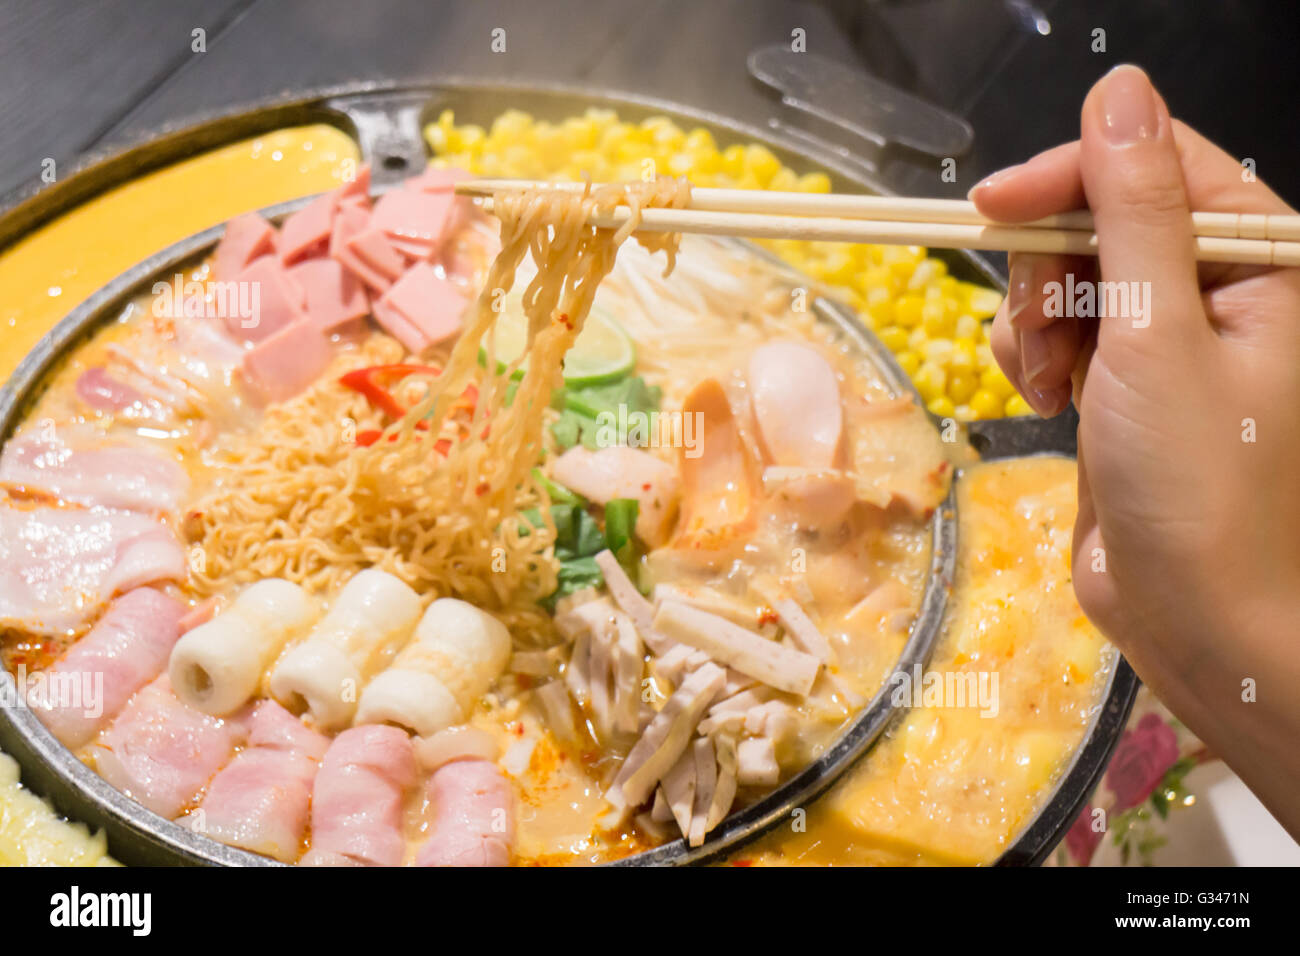 Hot serve of spicy noodle soup, stock photo Stock Photo